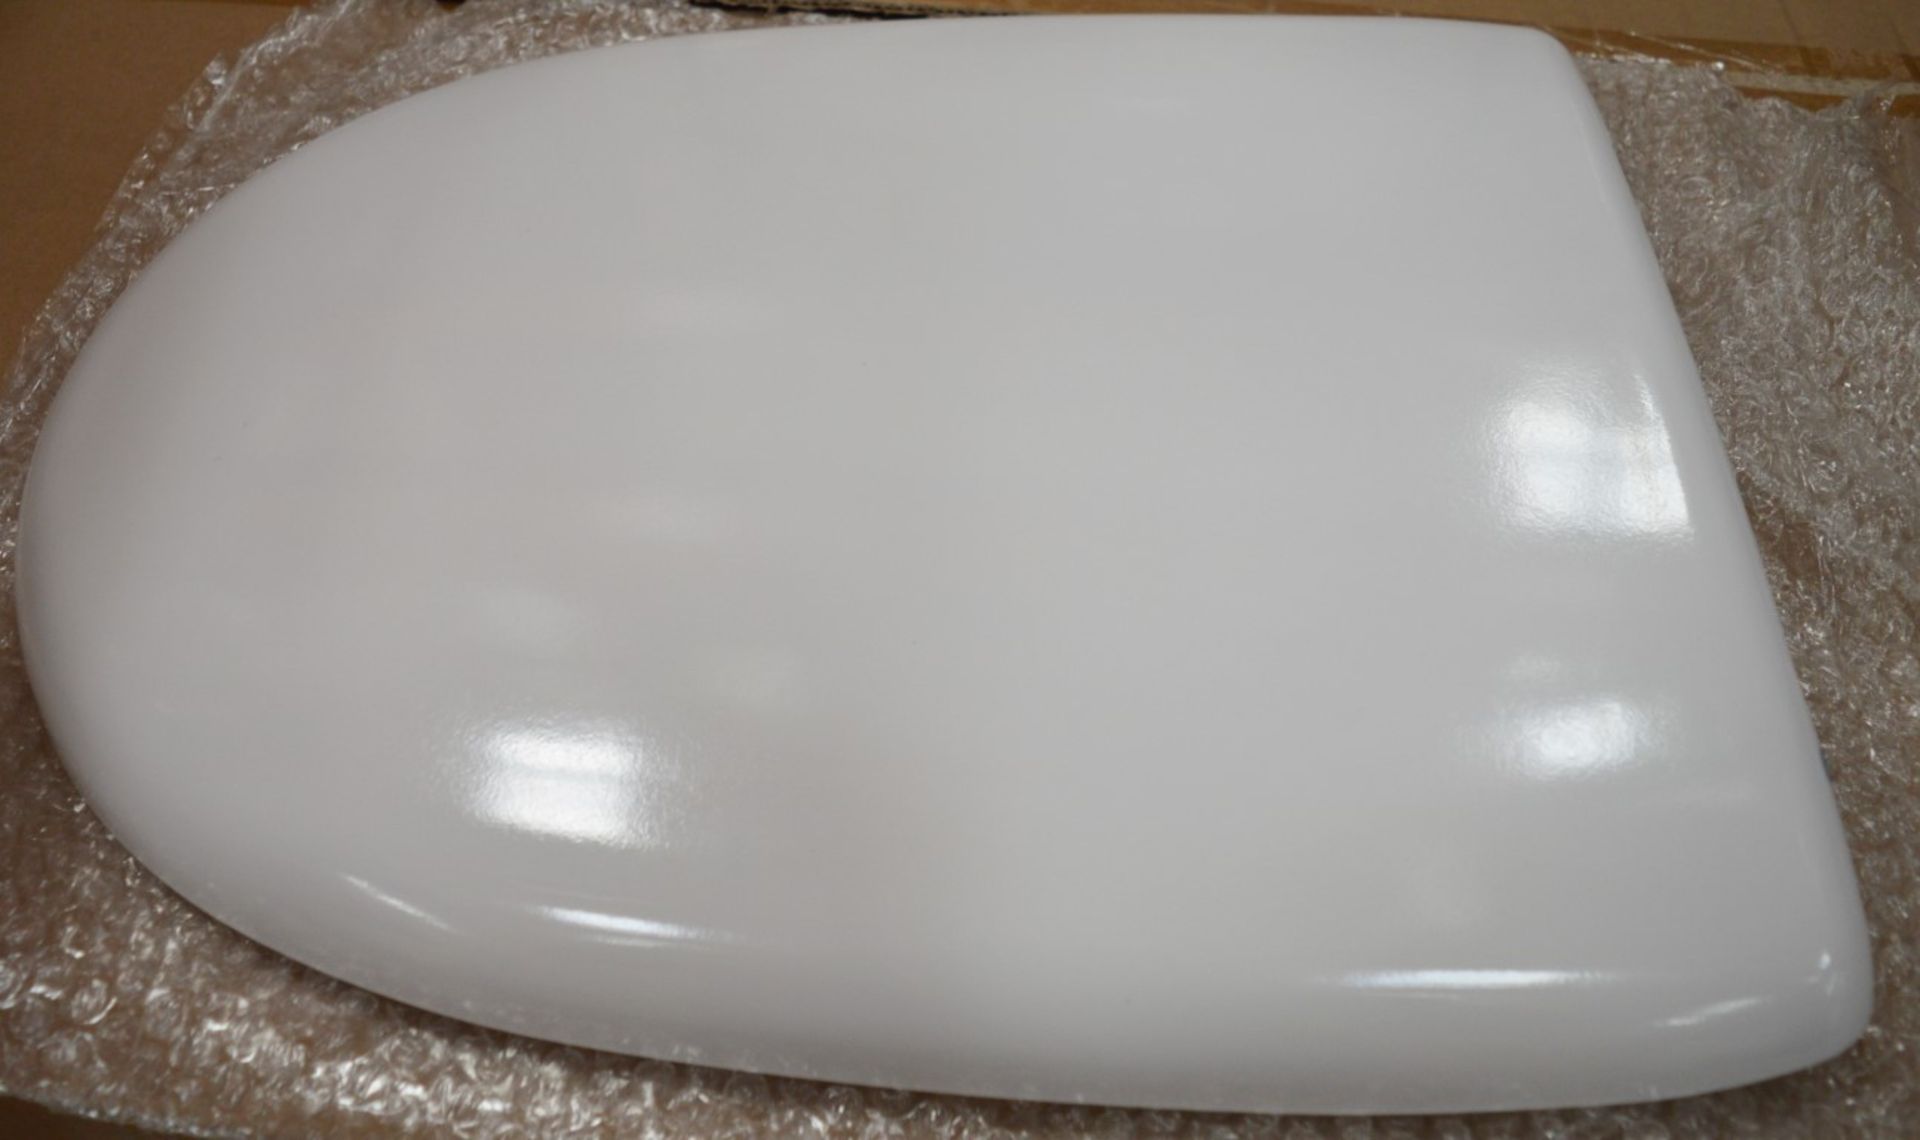 10 x Vogue Caprice Modern White Soft Close Toilet Seat and Cover Top Fixing - Brand New Boxed - Image 3 of 3